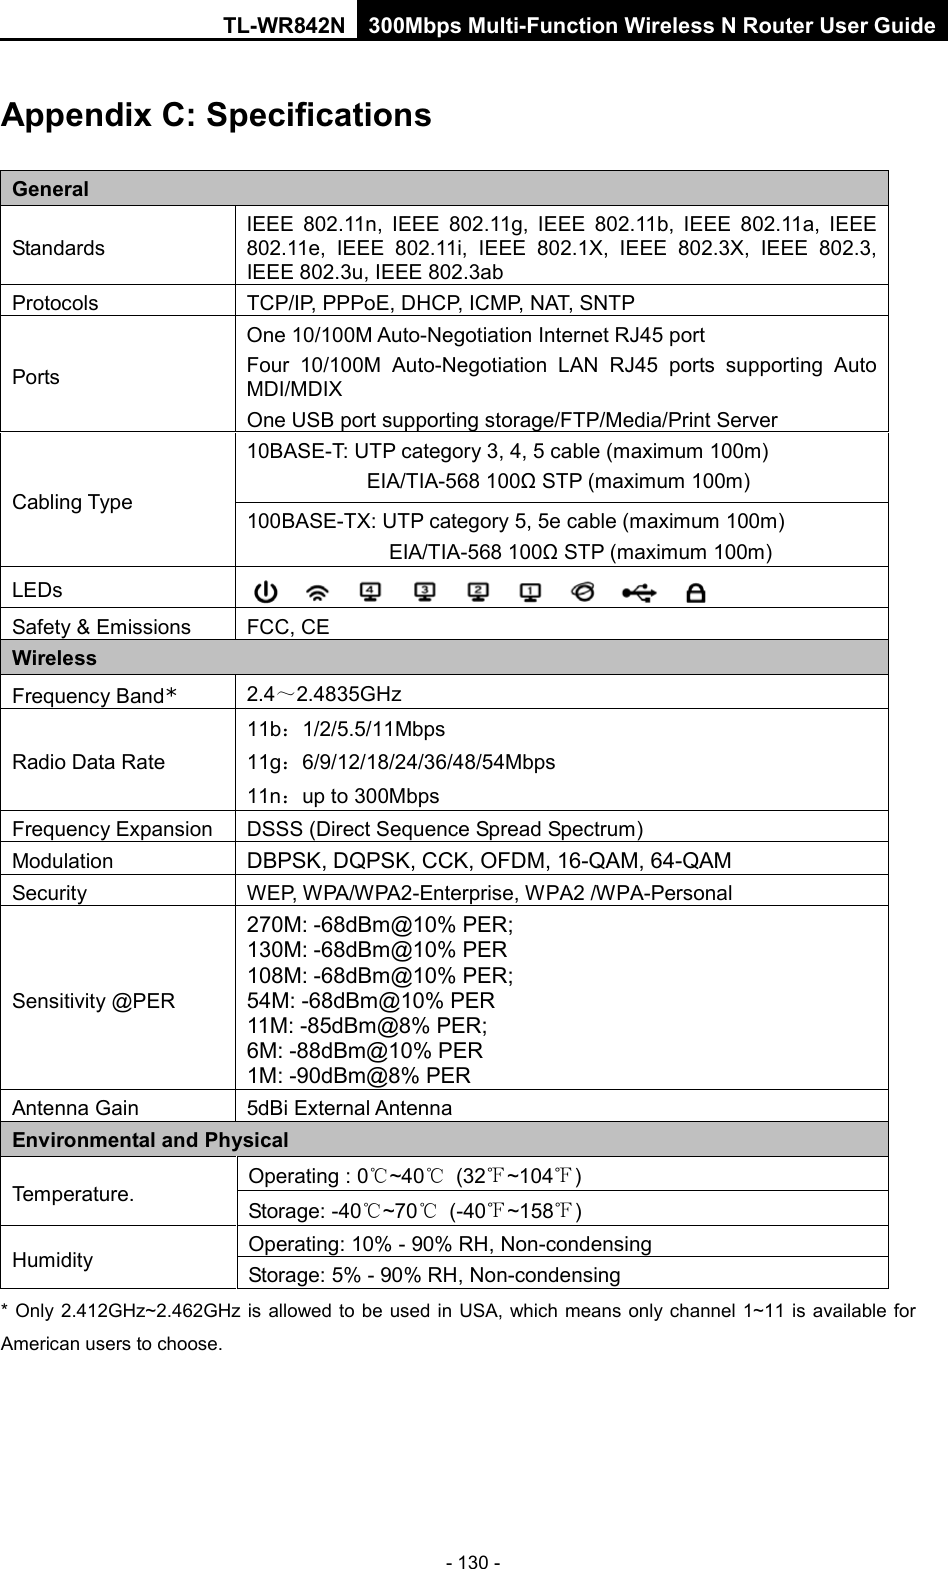 TL-WR842N 300Mbps Multi-Function Wireless N Router User Guide  - 130 - Appendix C: Specifications General Standards IEEE 802.11n,  IEEE 802.11g,  IEEE 802.11b,  IEEE 802.11a,  IEEE 802.11e,  IEEE 802.11i,  IEEE 802.1X,  IEEE 802.3X,  IEEE 802.3, IEEE 802.3u, IEEE 802.3ab Protocols TCP/IP, PPPoE, DHCP, ICMP, NAT, SNTP Ports One 10/100M Auto-Negotiation Internet RJ45 port   Four 10/100M Auto-Negotiation LAN RJ45 ports supporting Auto MDI/MDIX One USB port supporting storage/FTP/Media/Print Server Cabling Type 10BASE-T: UTP category 3, 4, 5 cable (maximum 100m) EIA/TIA-568 100Ω STP (maximum 100m) 100BASE-TX: UTP category 5, 5e cable (maximum 100m) EIA/TIA-568 100Ω STP (maximum 100m) LEDs  Safety &amp; Emissions FCC, CE Wireless Frequency Band* 2.4～2.4835GHz Radio Data Rate 11b：1/2/5.5/11Mbps 11g：6/9/12/18/24/36/48/54Mbps 11n：up to 300Mbps Frequency Expansion DSSS (Direct Sequence Spread Spectrum) Modulation DBPSK, DQPSK, CCK, OFDM, 16-QAM, 64-QAM Security WEP, W PA/W PA2-Enterprise, WPA2 /WPA-Personal Sensitivity @PER 270M: -68dBm@10% PER; 130M: -68dBm@10% PER 108M: -68dBm@10% PER;   54M: -68dBm@10% PER 11M: -85dBm@8% PER;   6M: -88dBm@10% PER 1M: -90dBm@8% PER Antenna Gain 5dBi External Antenna Environmental and Physical Tem perature. Operating : 0℃~40℃ (32℉~104℉) Storage: -40℃~70℃  (-40℉~158℉) Humidity Operating: 10% - 90% RH, Non-condensing Storage: 5% - 90% RH, Non-condensing * Only 2.412GHz~2.462GHz is allowed to be used in USA, which means only channel 1~11 is available for American users to choose. 